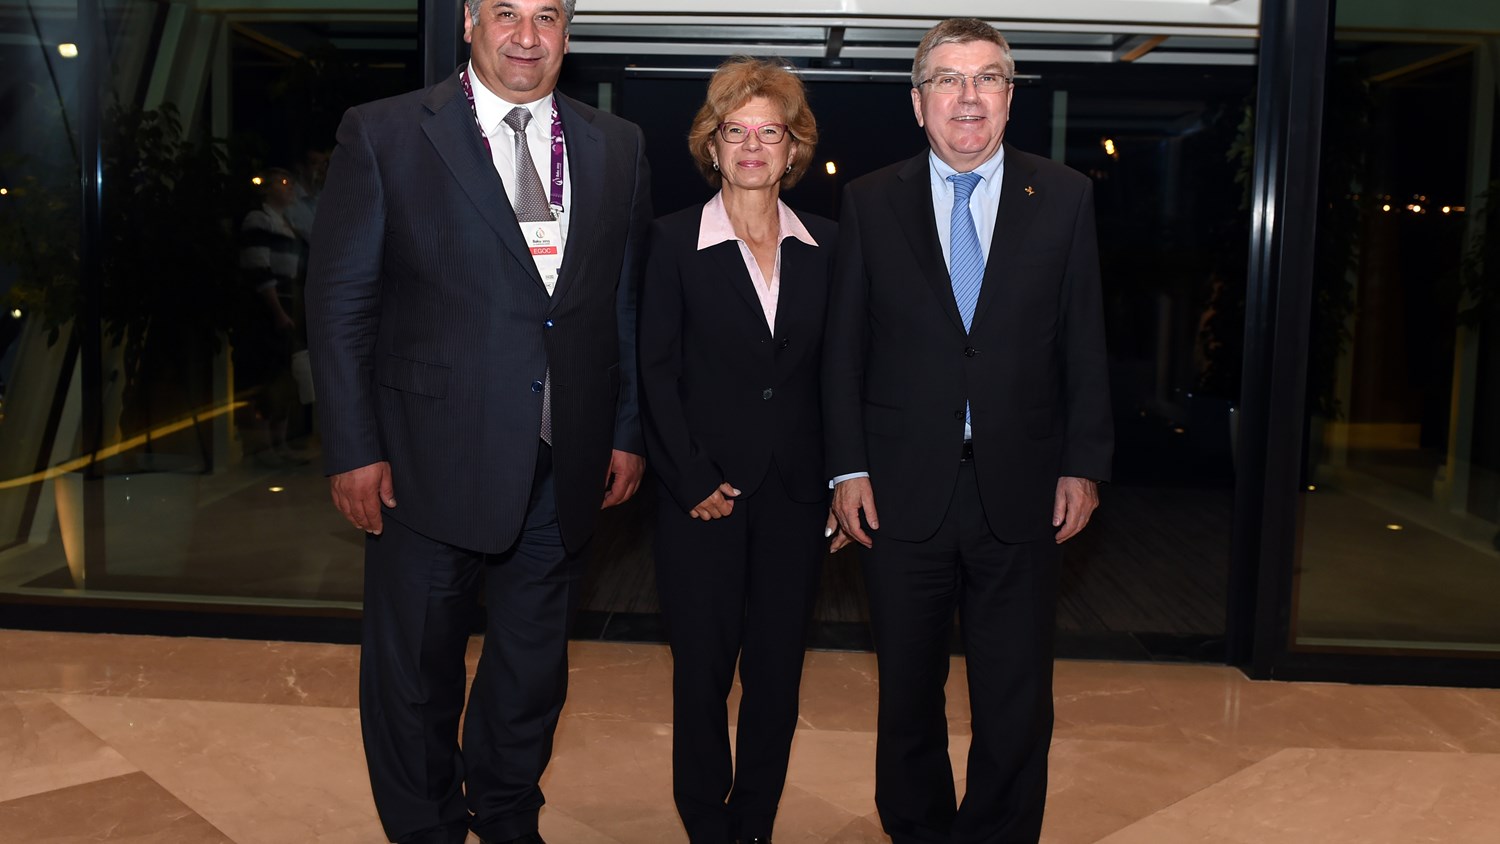 IOC president arrives in Baku for opening ceremony